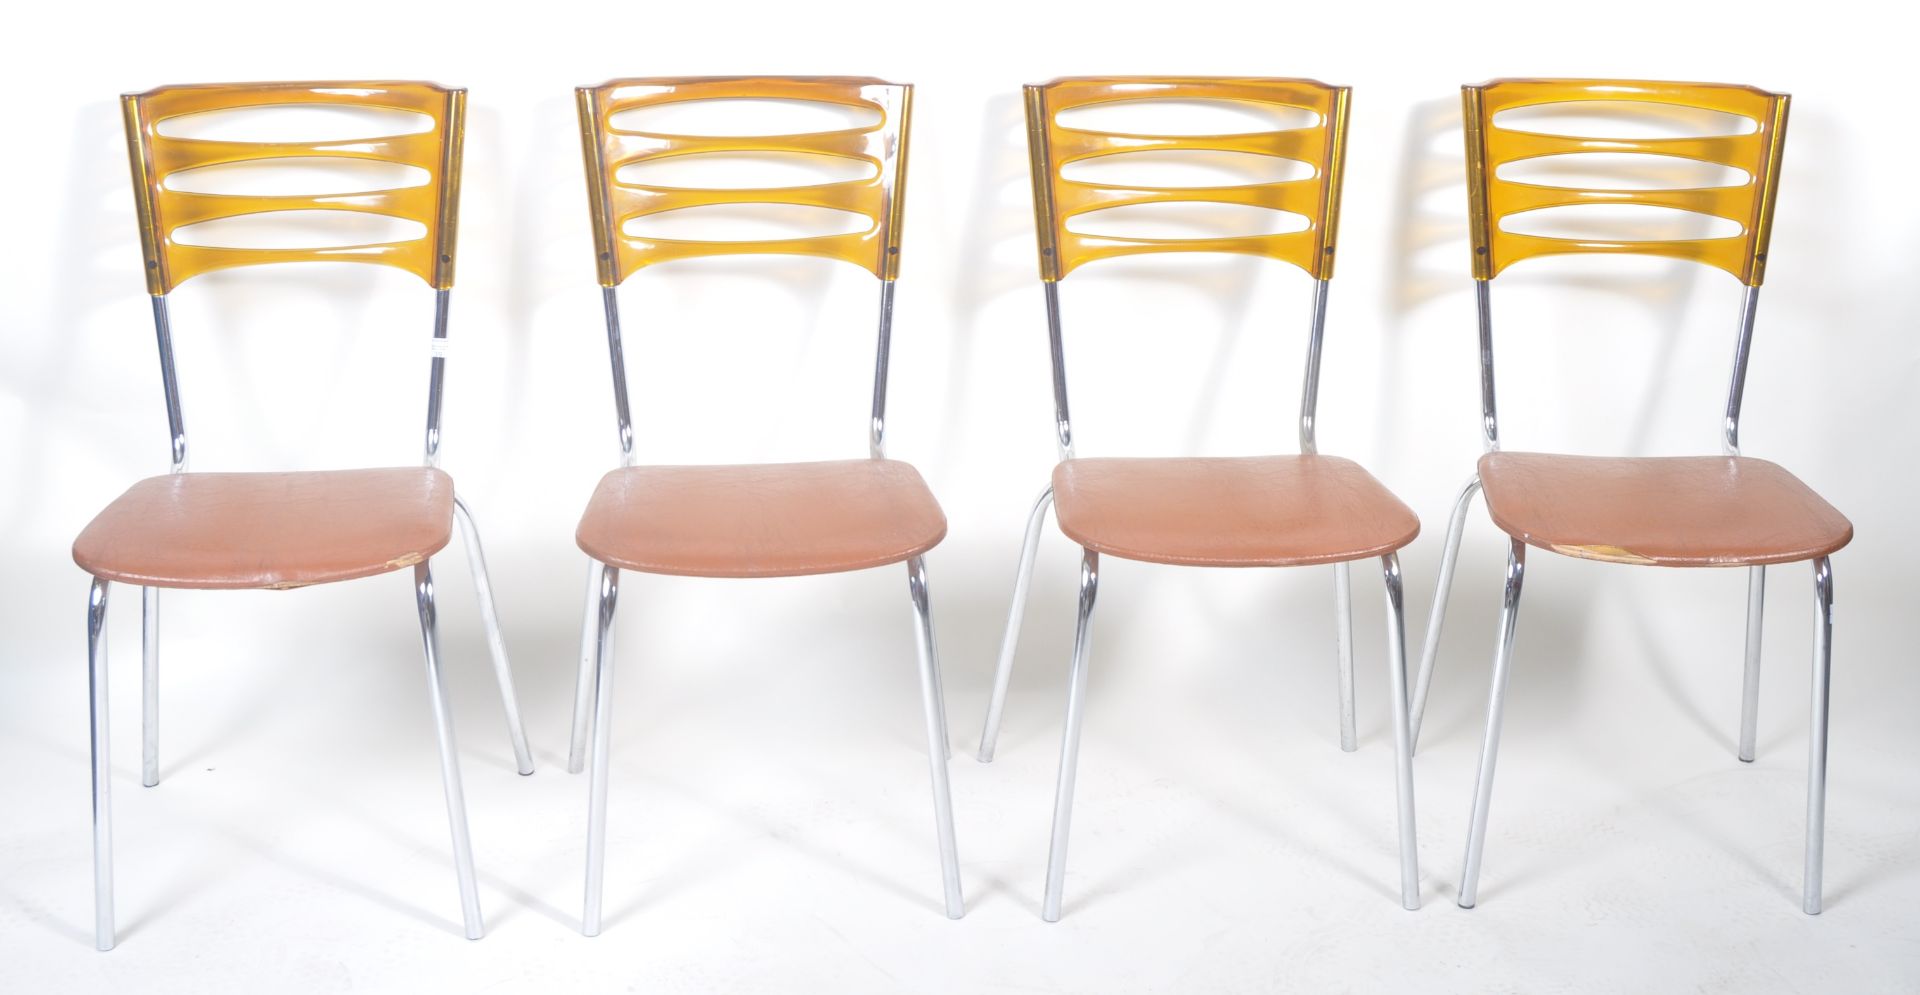 KERON - SET OF FOUR 1970'S STACKING DINING CHAIRS - Image 2 of 5